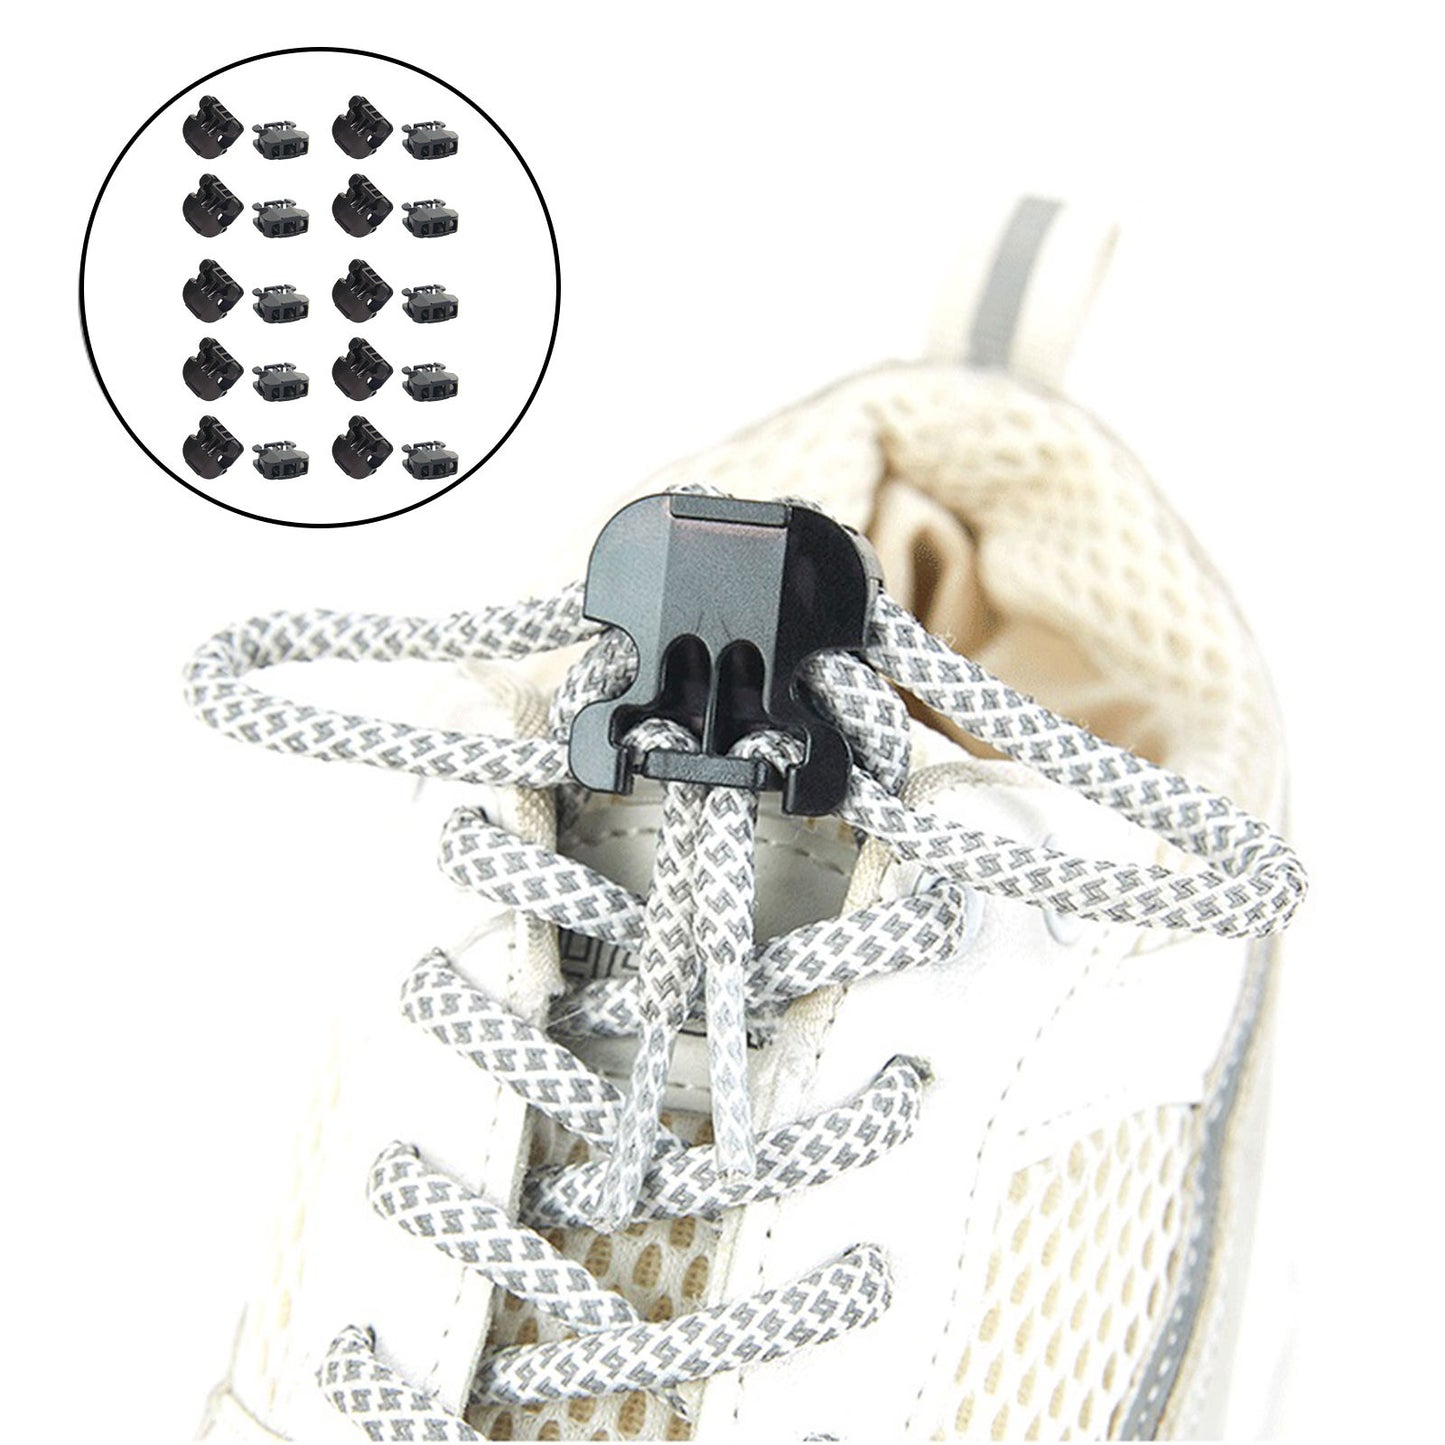 Spring Shoe Laces Lock – SpringLime